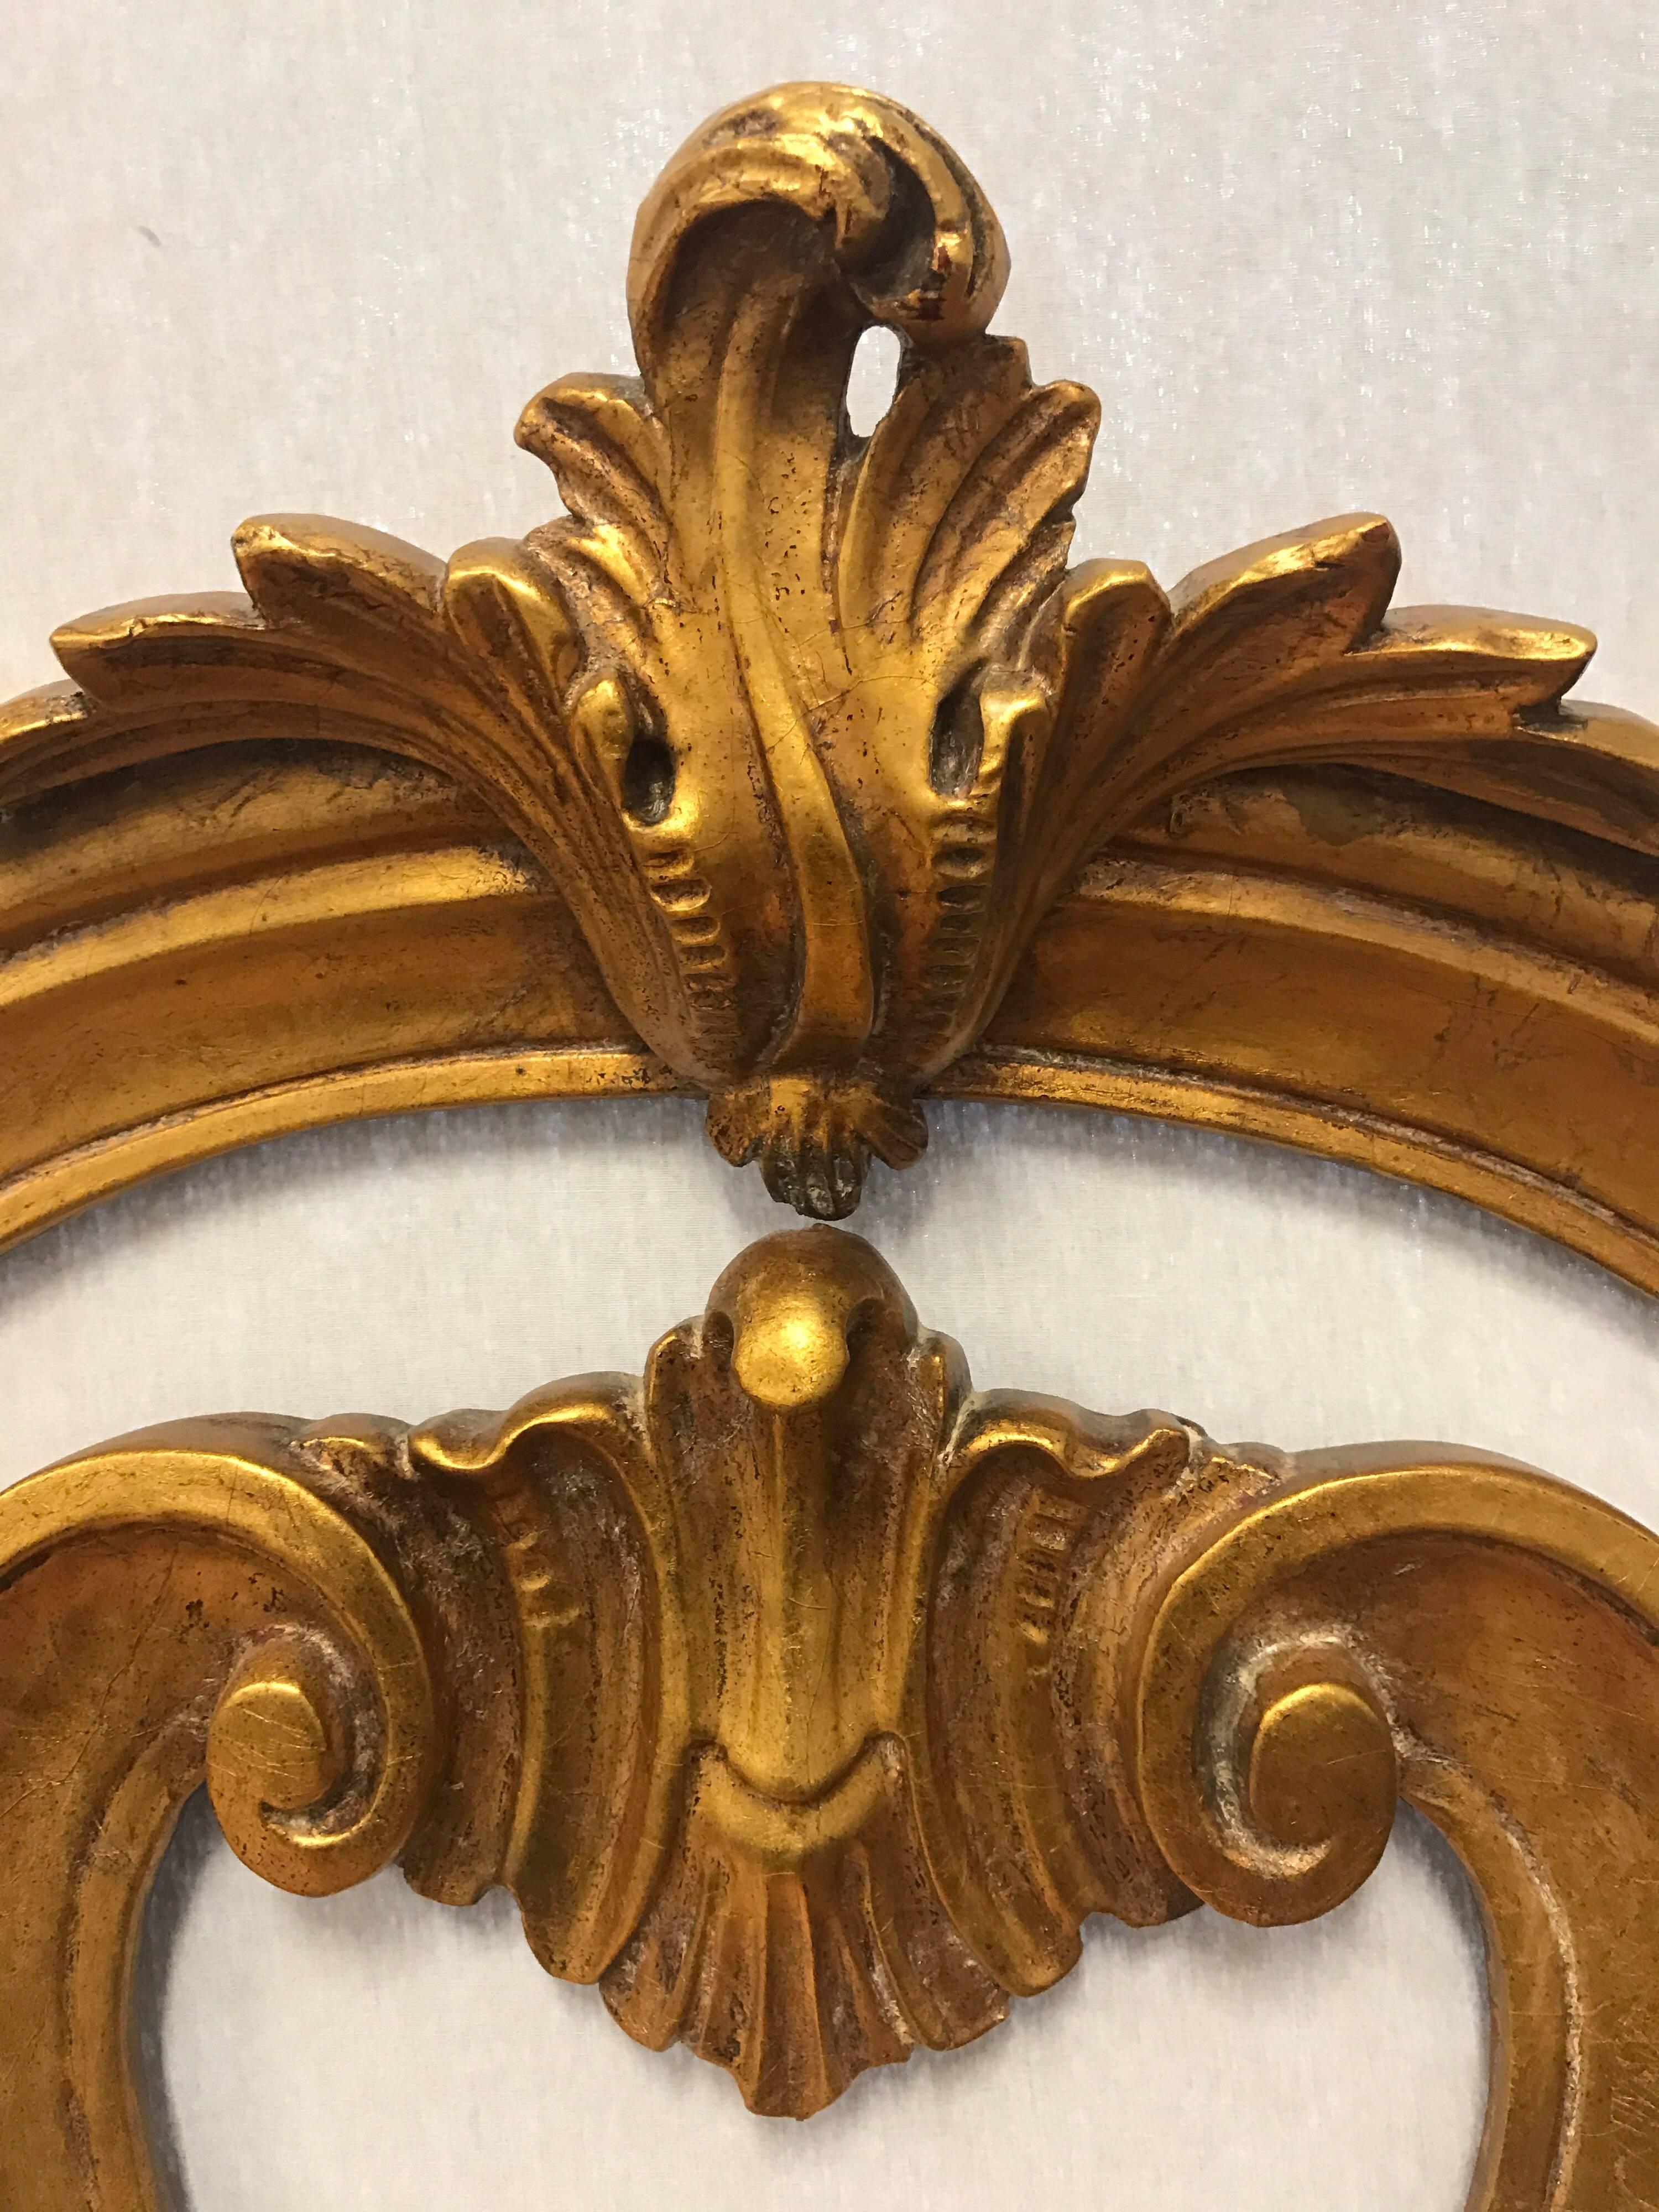 Hand-carved throughout and adorned with giltwood throughout. Guaranteed to make a statement!